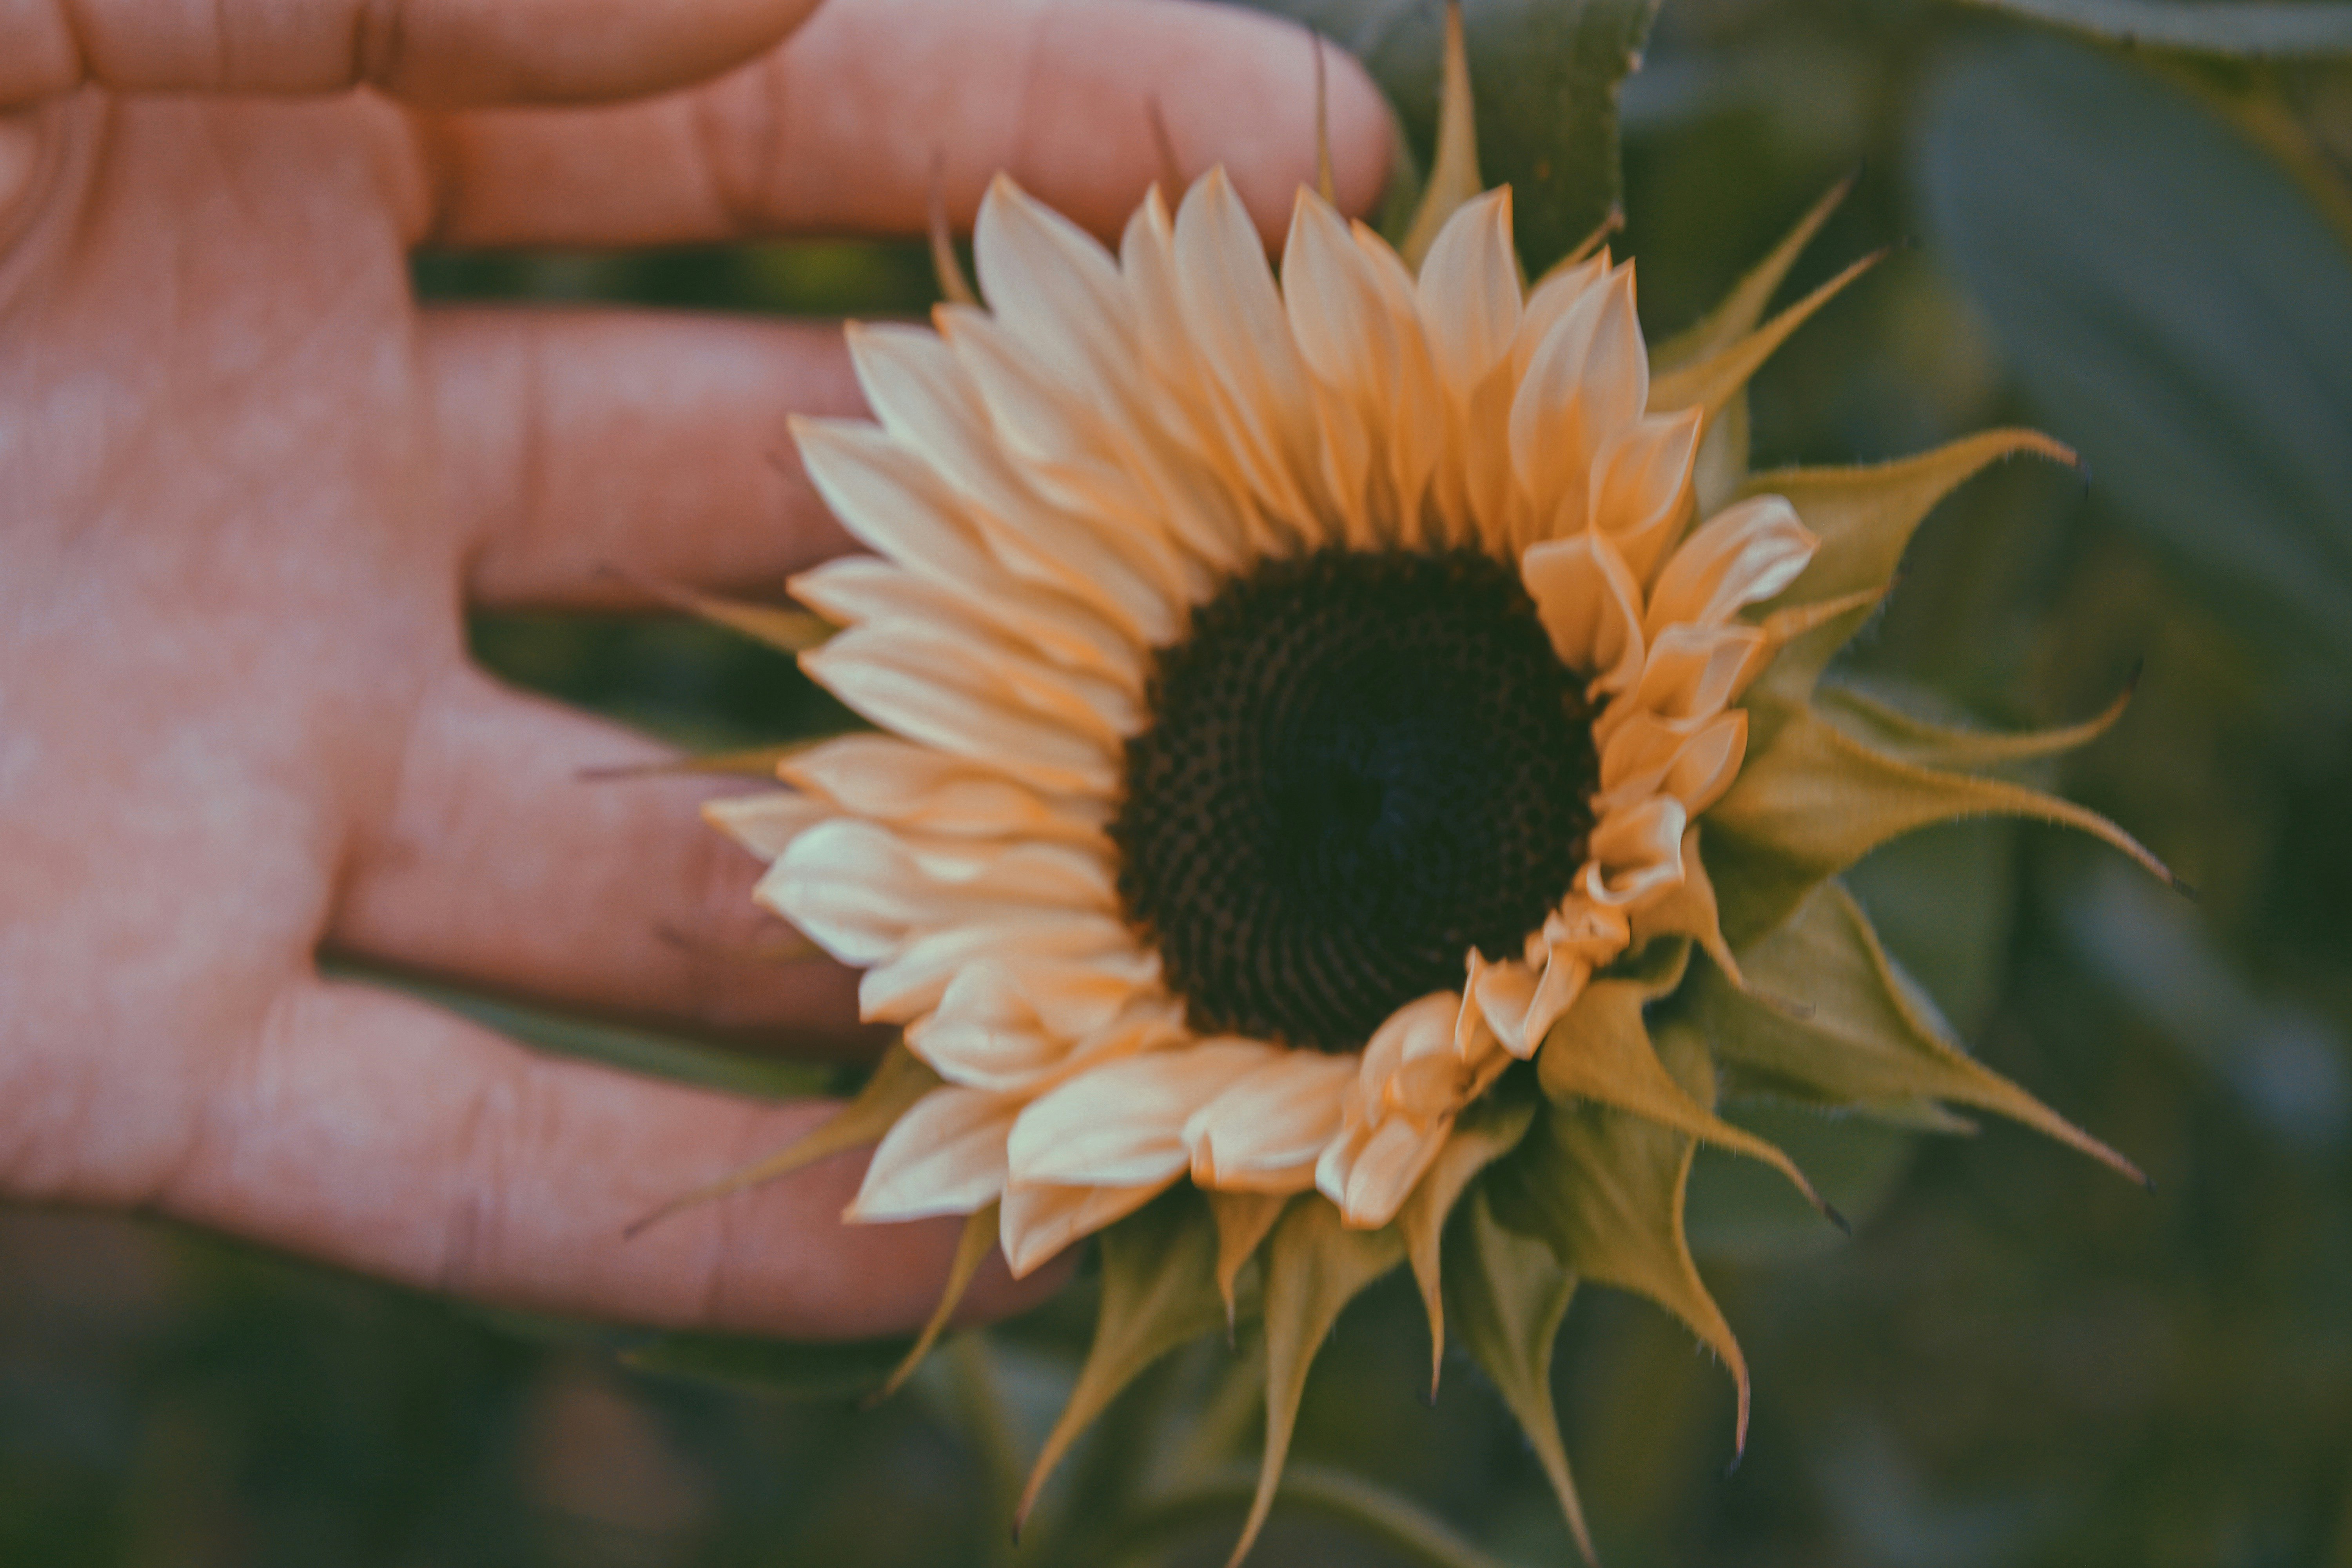 yellow and black sunflower on persons hand